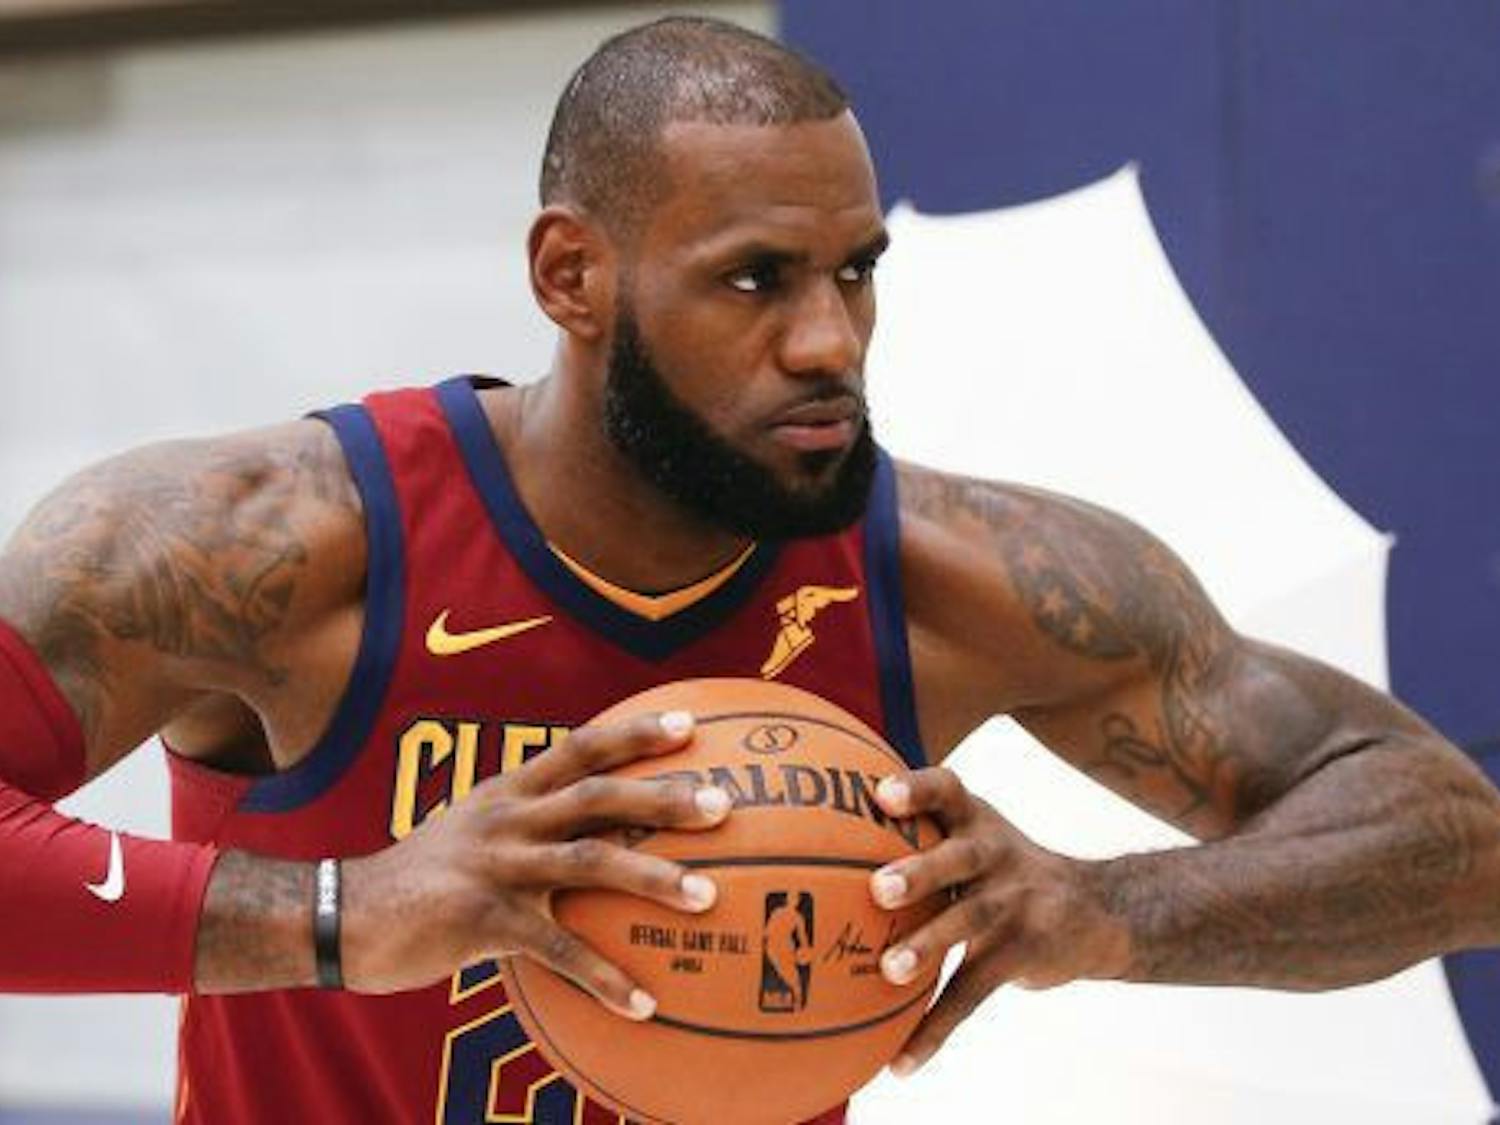 Lebron James didn't mince words on his feelings about paying college athletes.&nbsp;“I don’t know if there’s any fixing the NCAA,” he said.